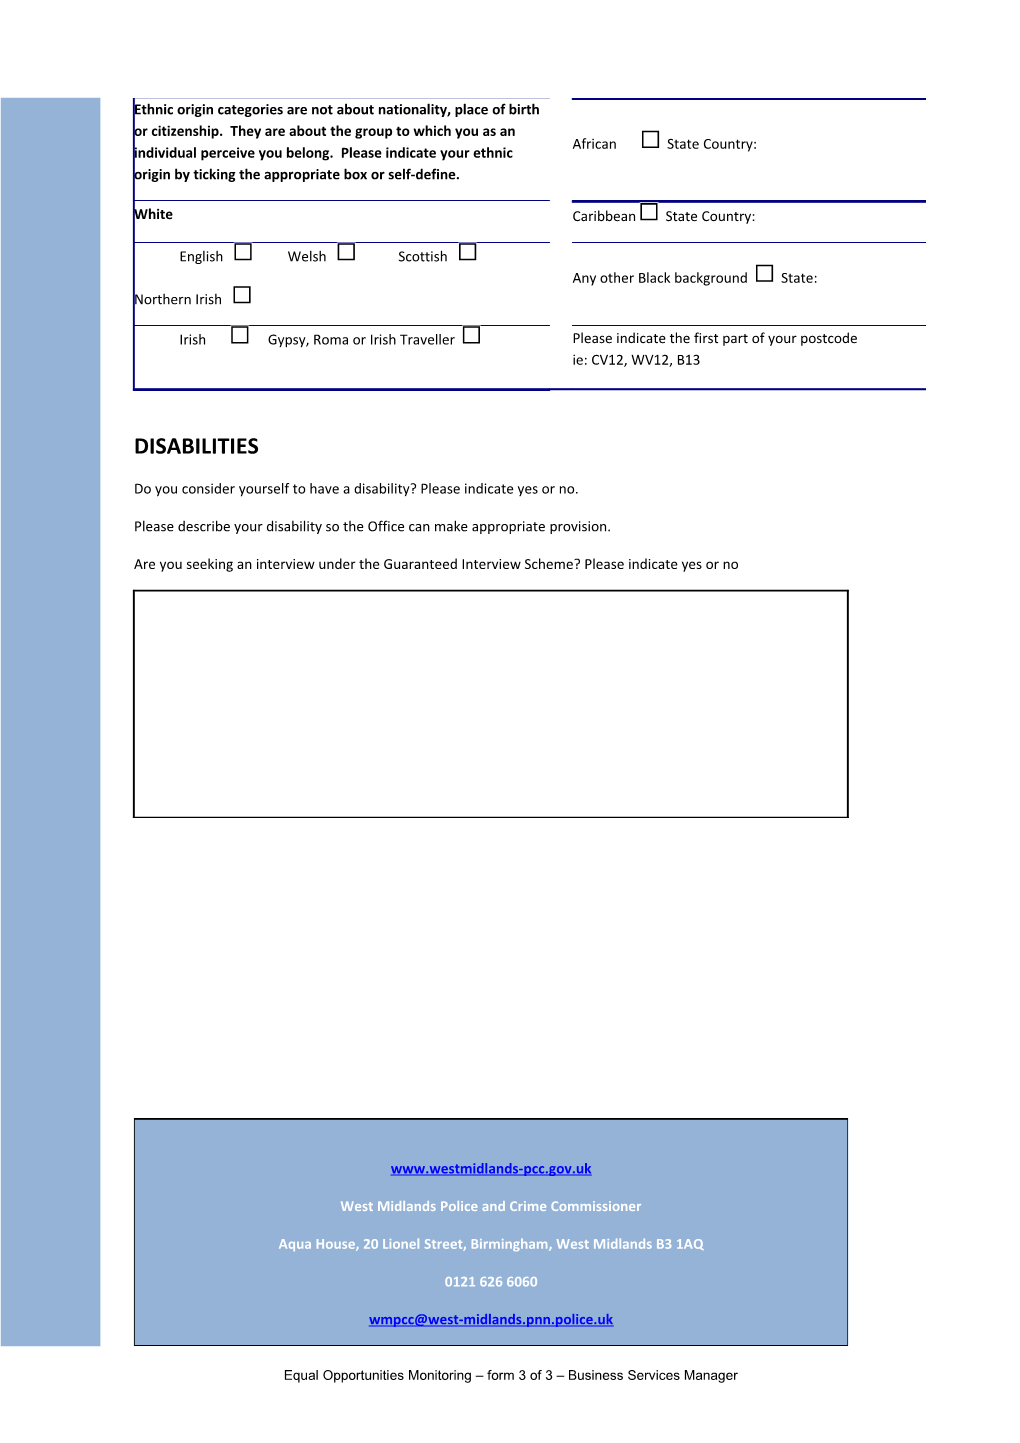 Equal Opportunities Monitoring Form 3 of 3 Business Services Manager